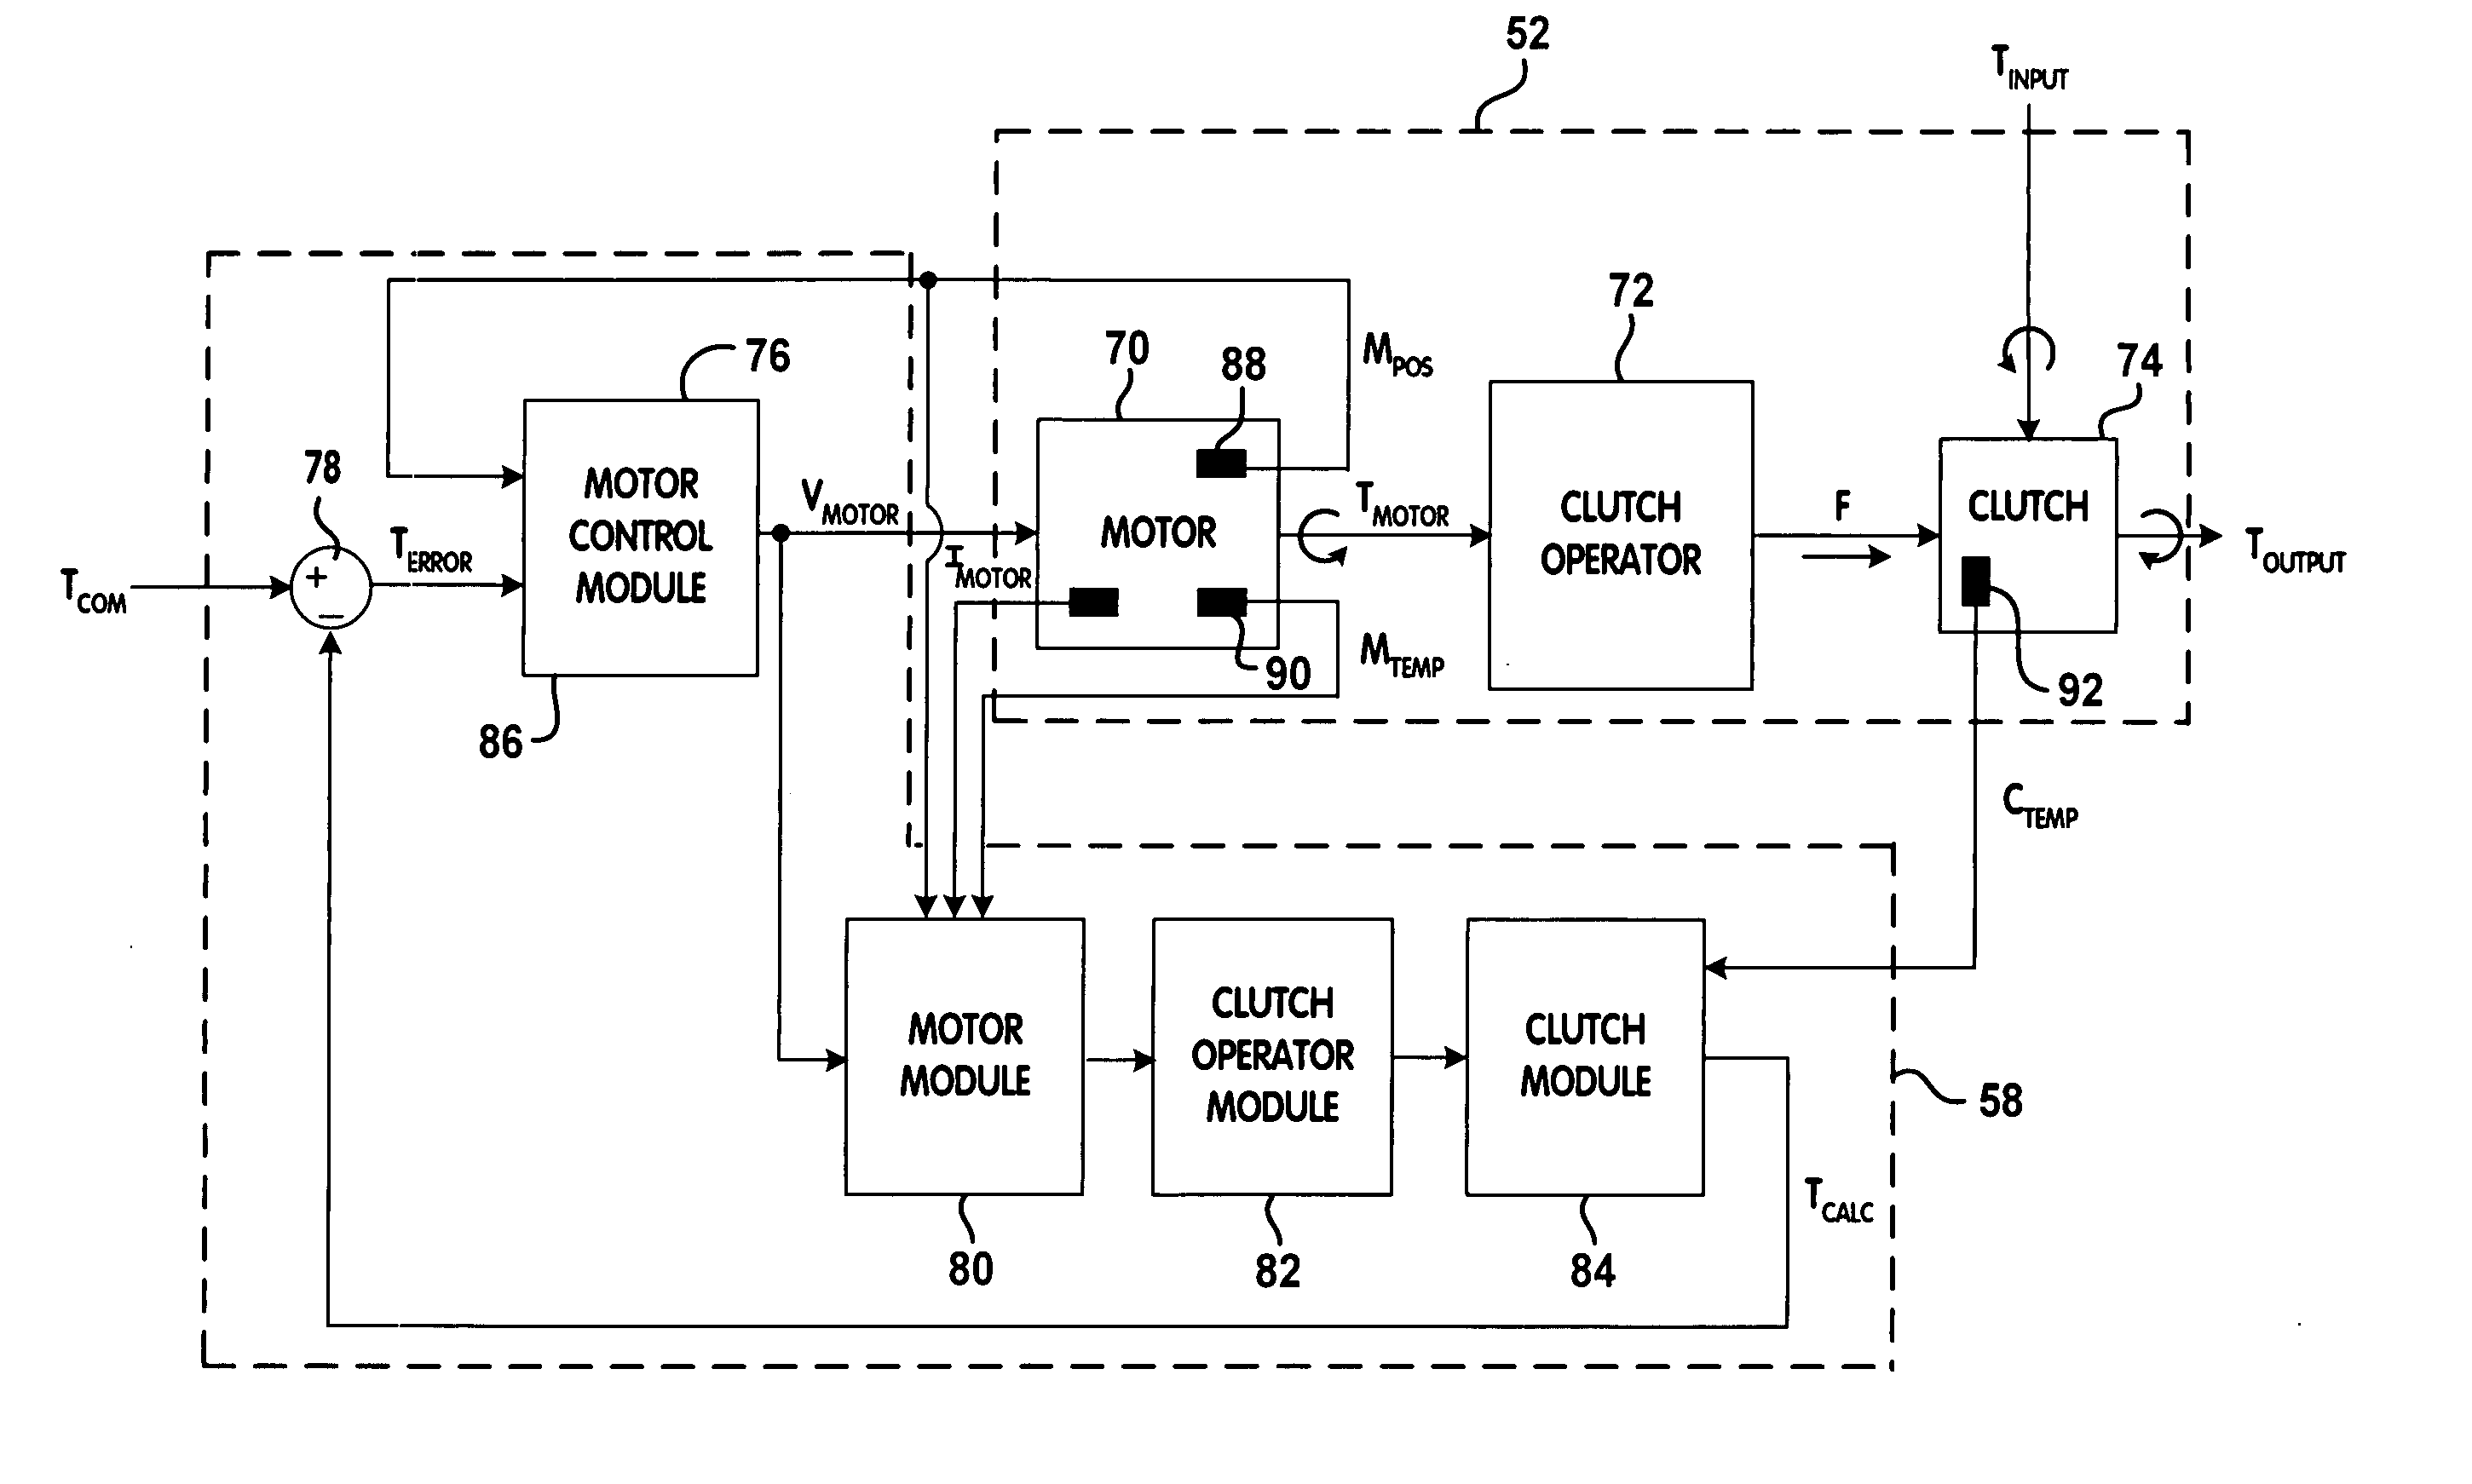 Model-based control for torque biasing system